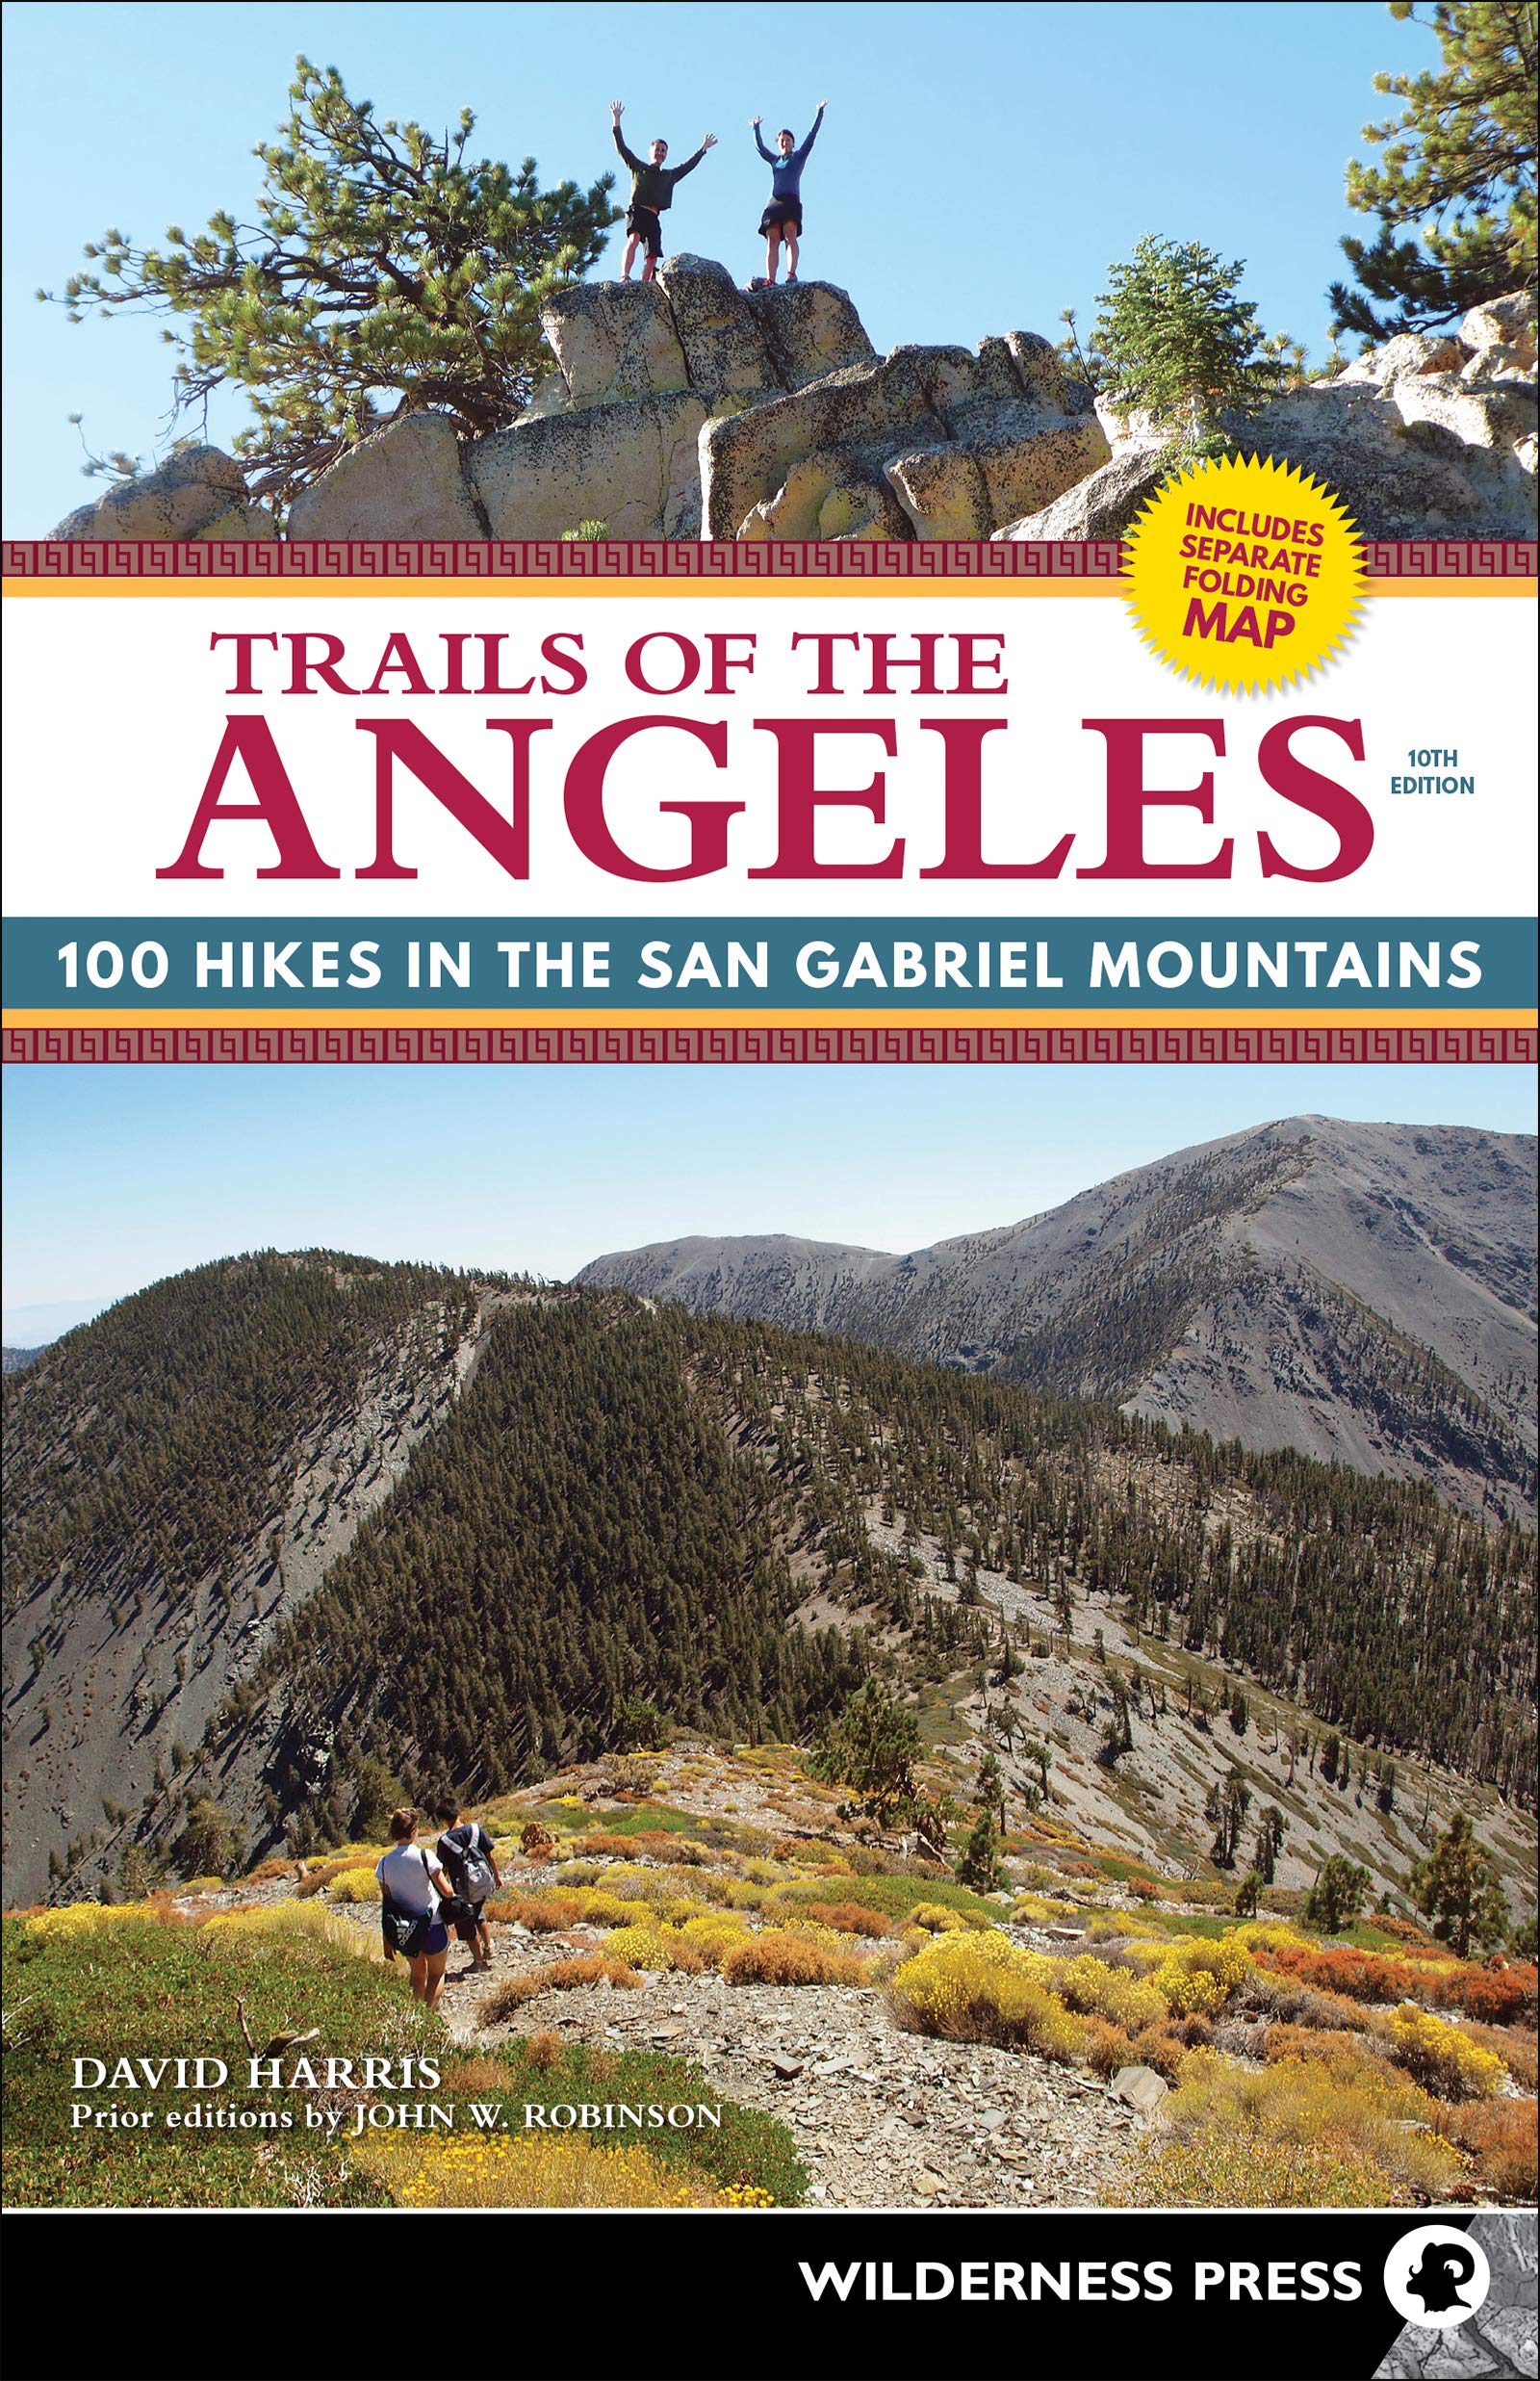 Trails of the Angeles: 100 Hikes in the San Gabriel Mountains